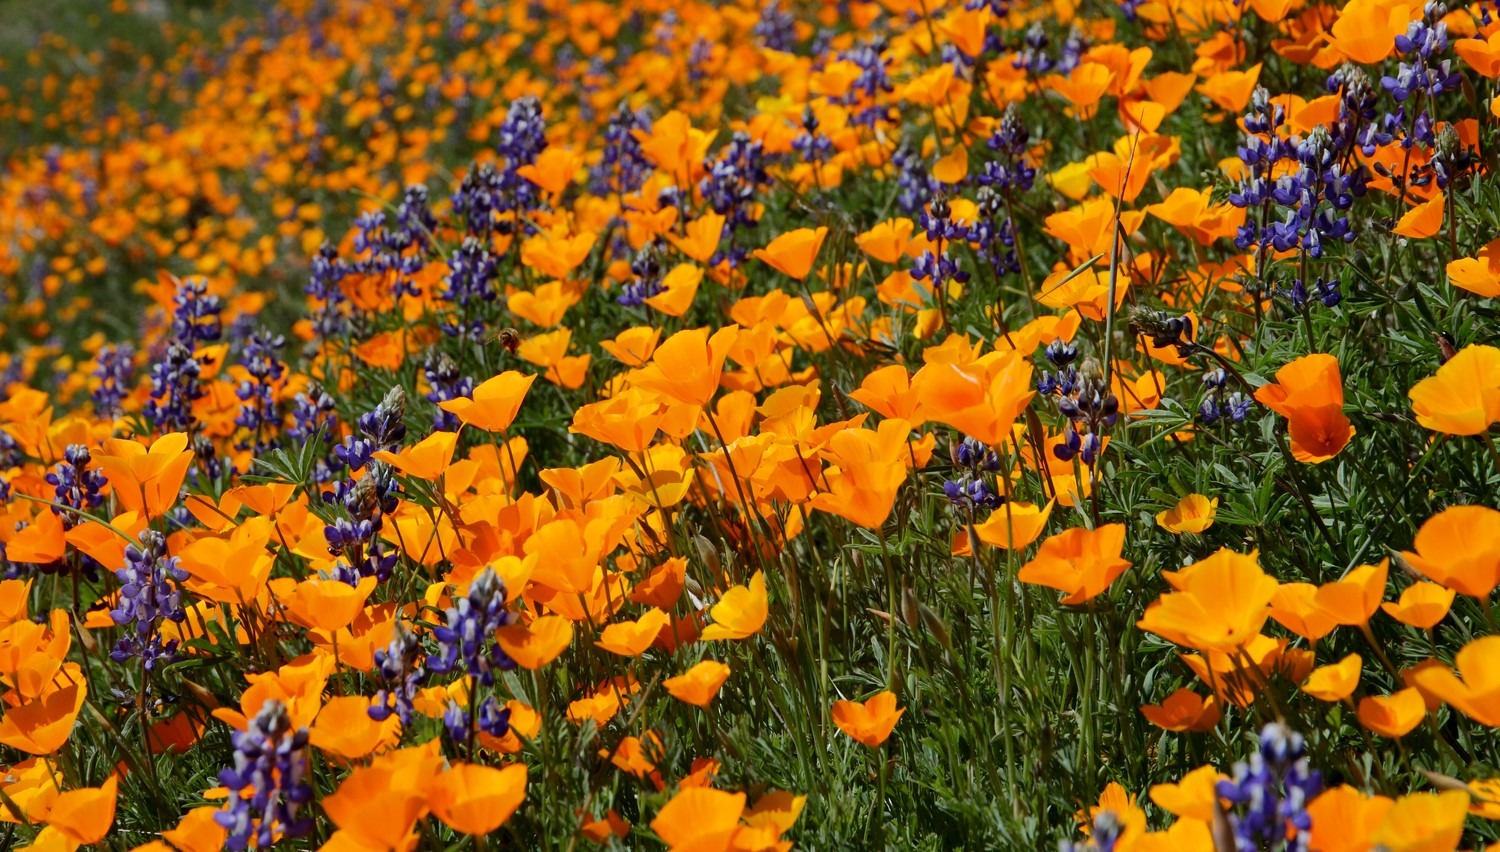 Bright flowers blooming in El Portal, just outside Yosemite National Park. Photo: Ann & Rob Simpson